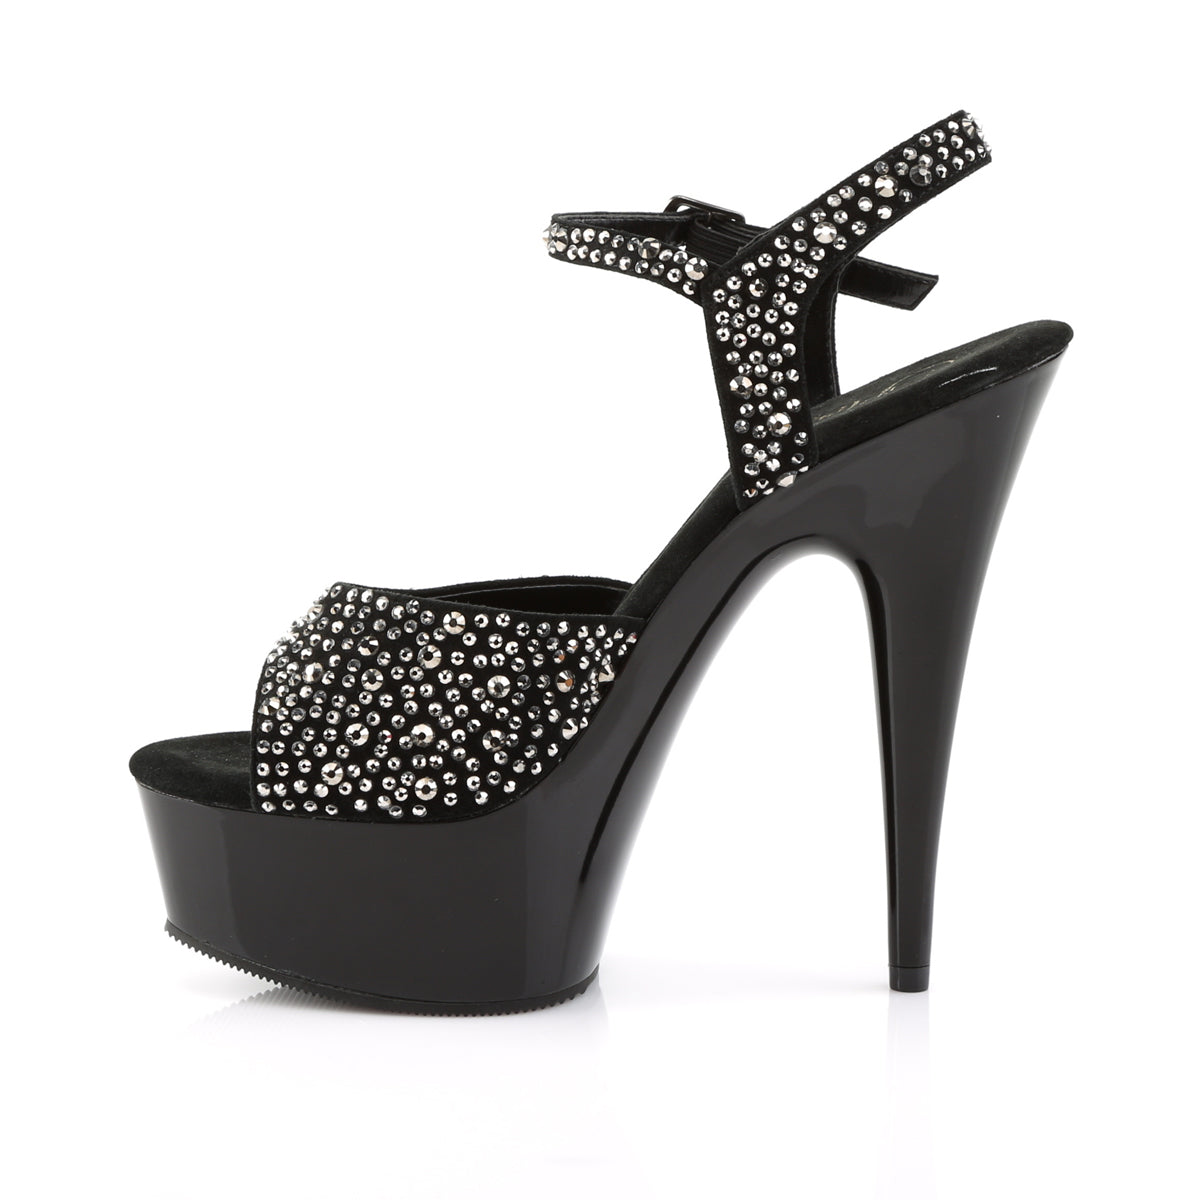 DELIGHT-609RS 6" Heel Black w Pewter Rhinestone Sexy Shoes-Pleaser- Sexy Shoes Pole Dance Heels